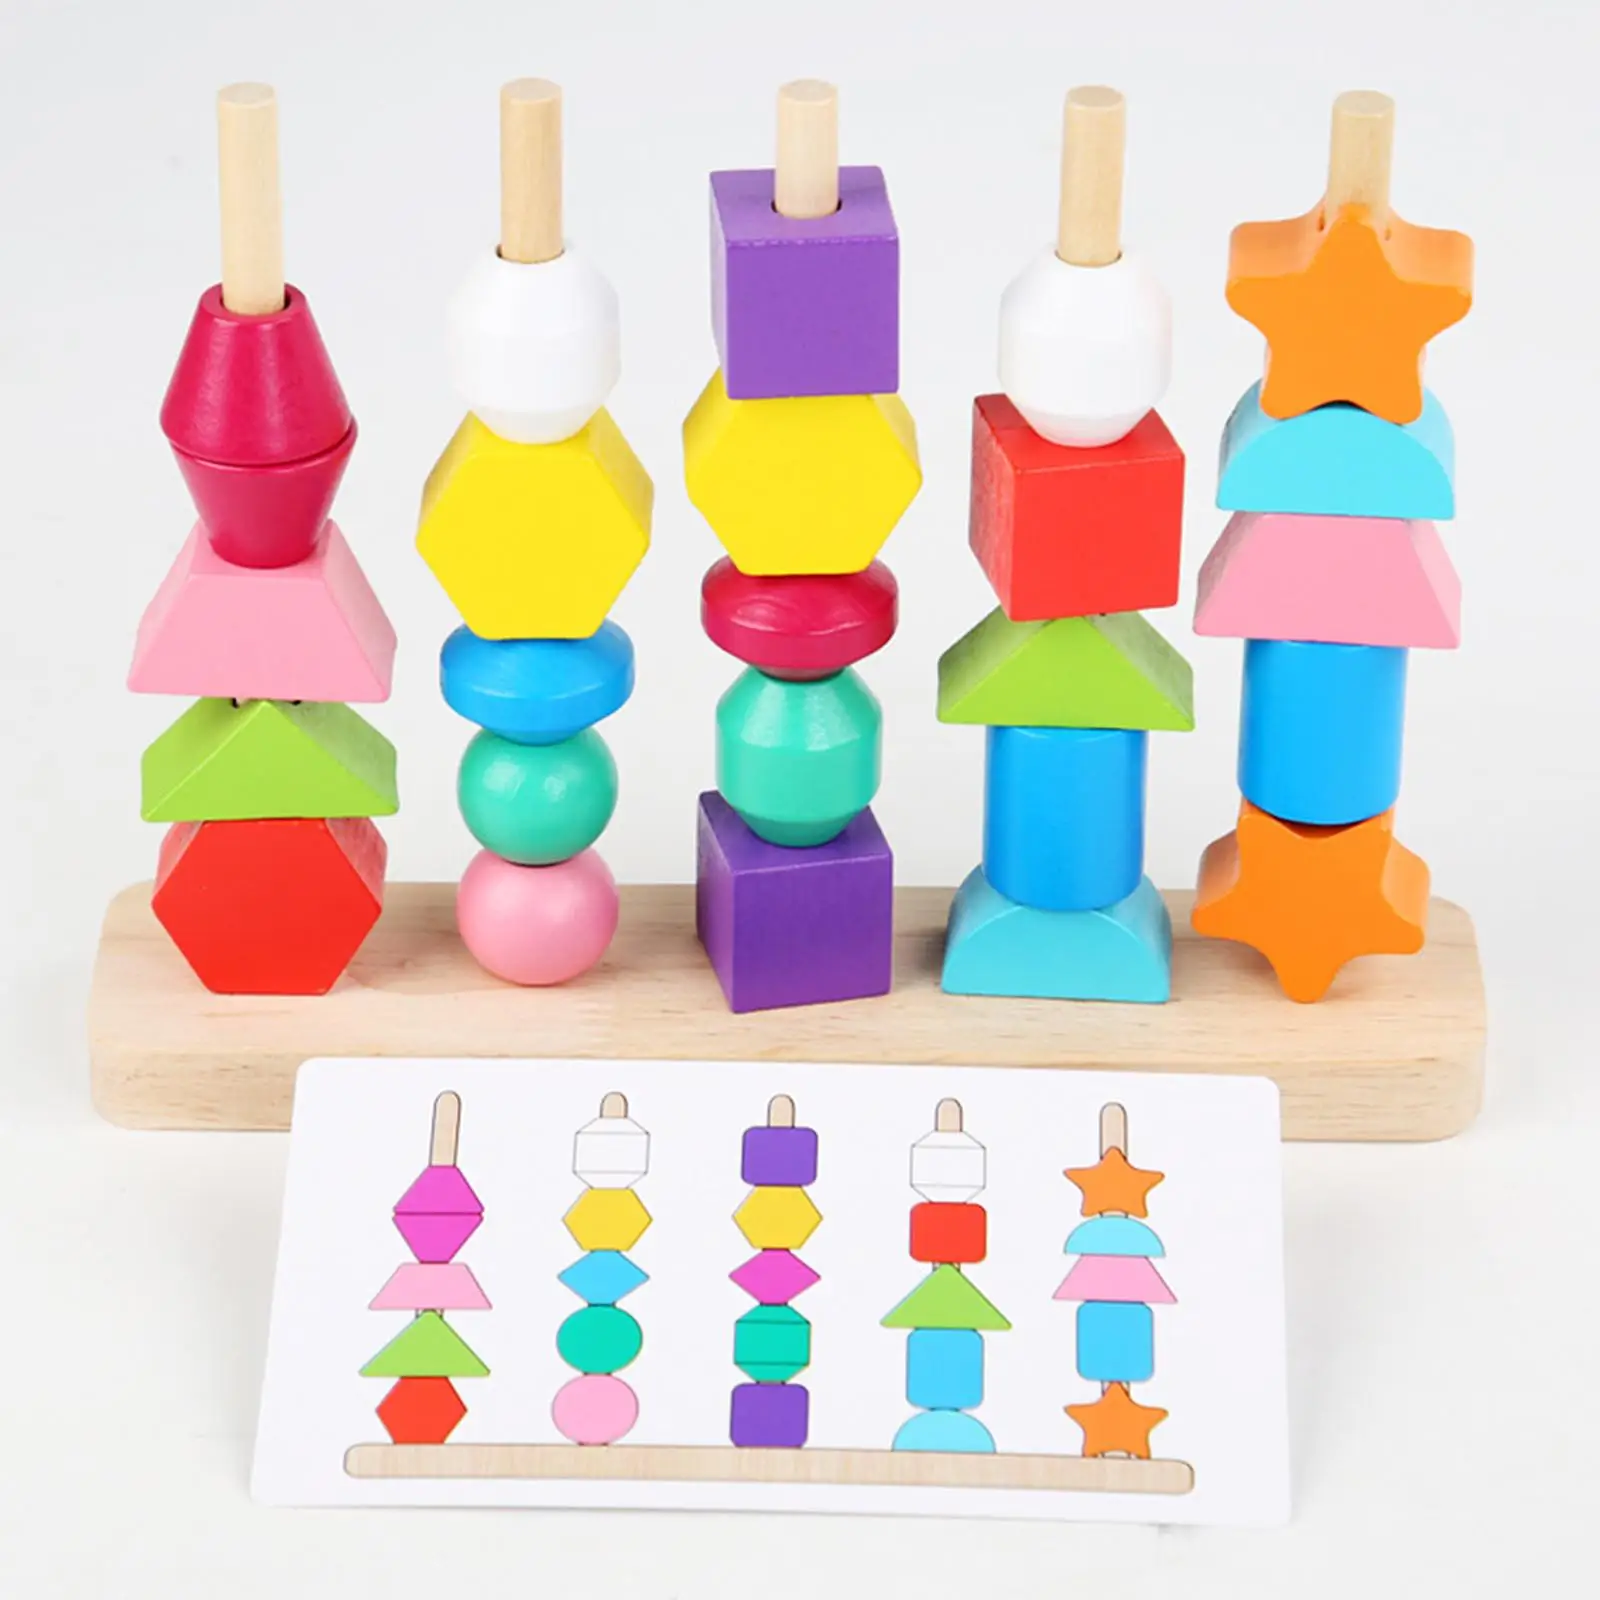 Five Sets Beaded Toys Educational Sensory Toy Wooden Learning Colorful Blocks for Toddlers Birthday Gift Children Kids Preschool